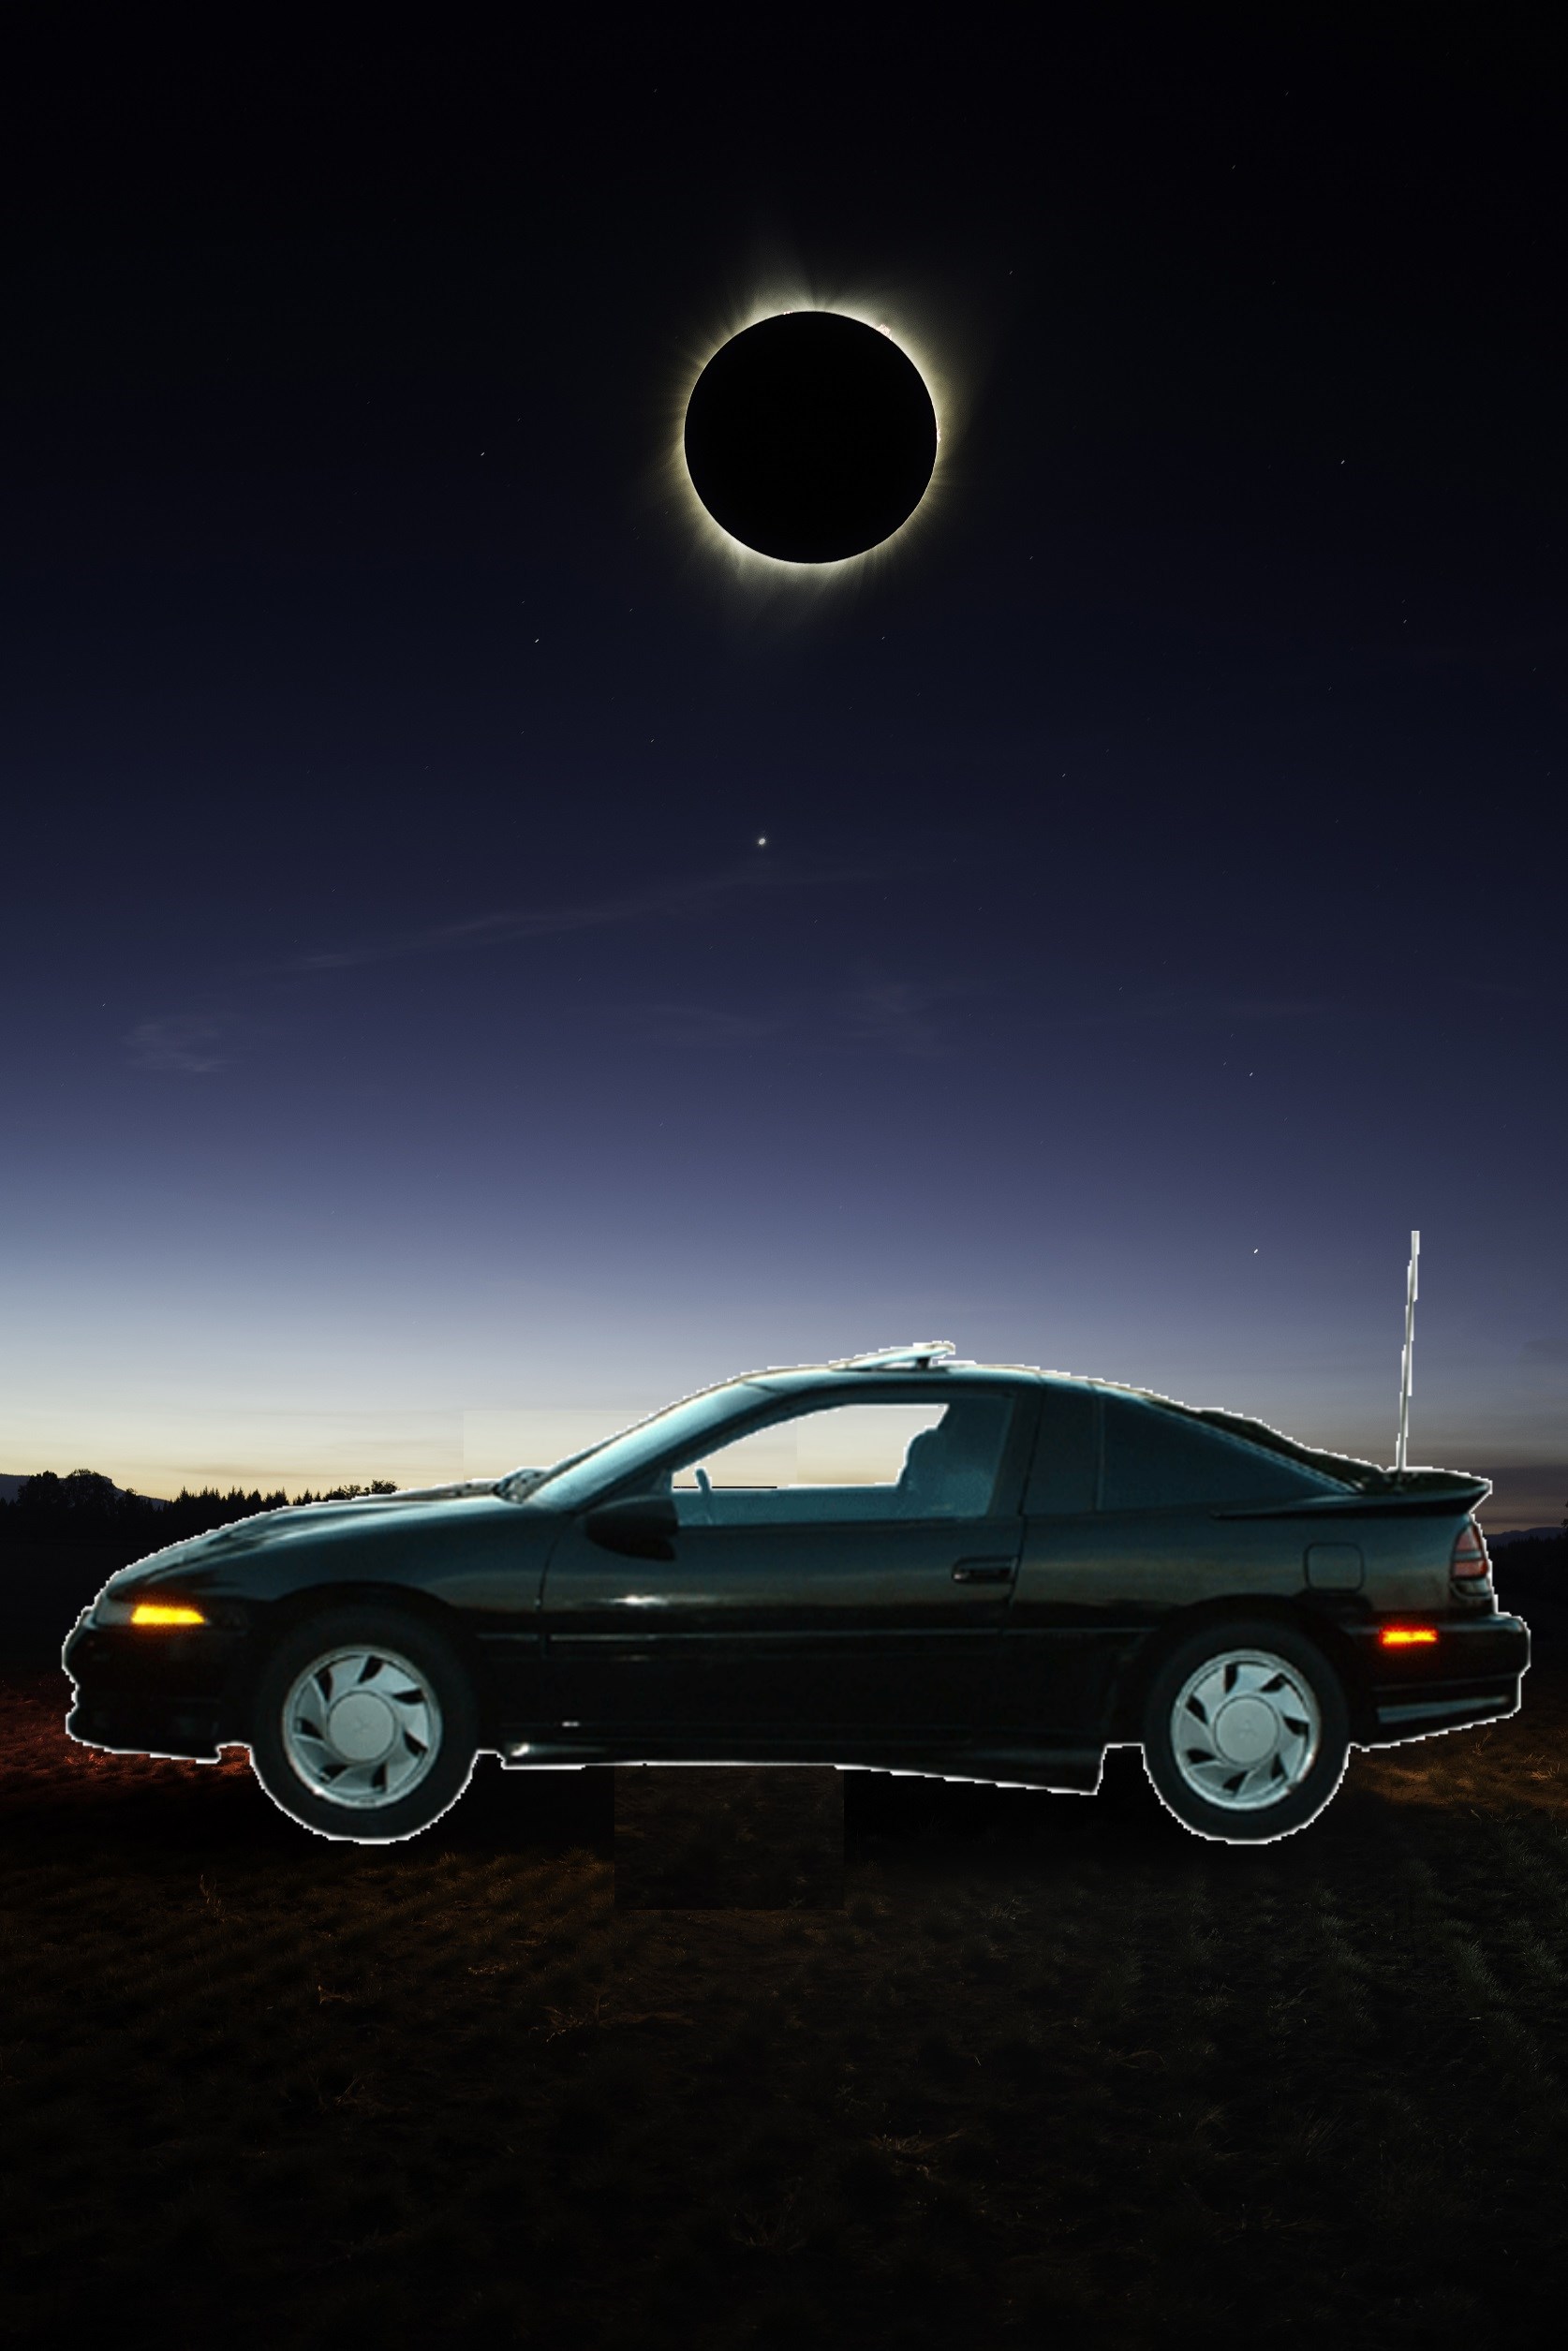 message-editor%2F1503426029288-real-eclipse.jpg